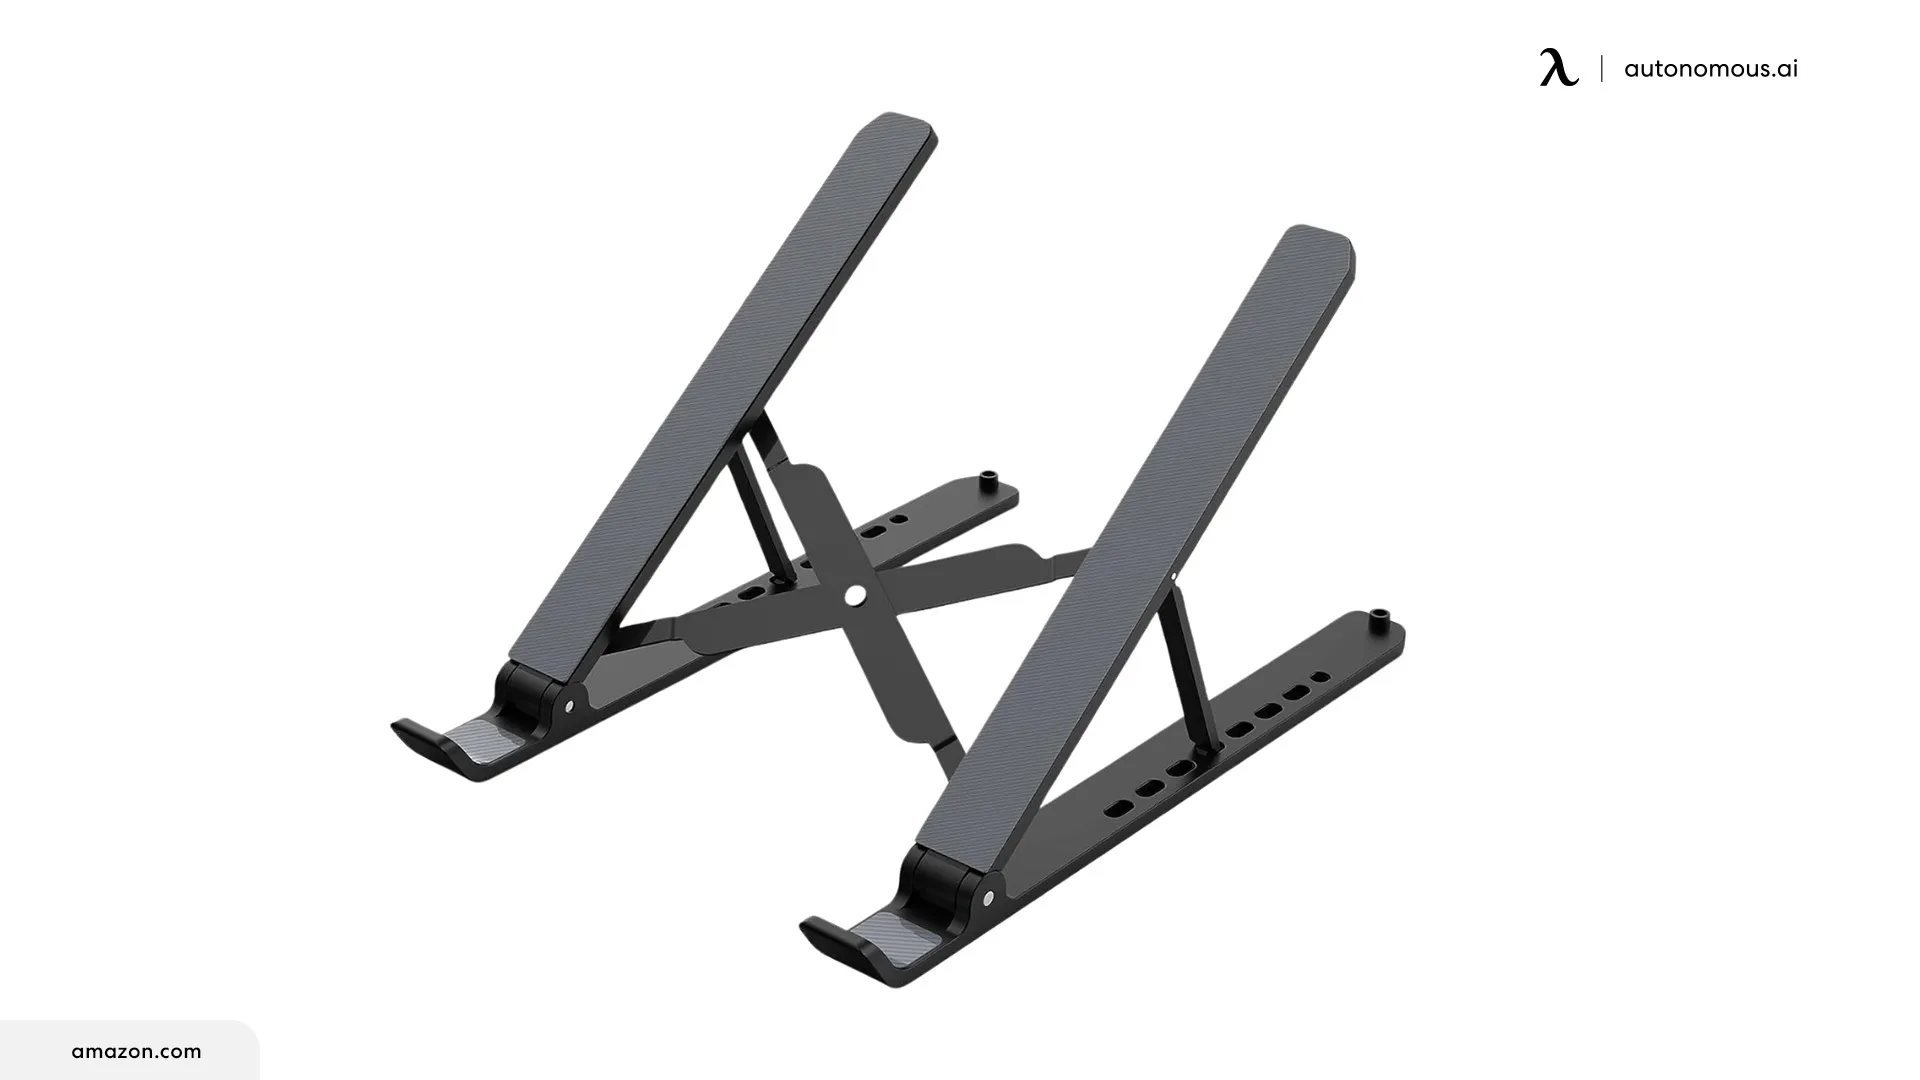 Tonmom Laptop Stand for Desk